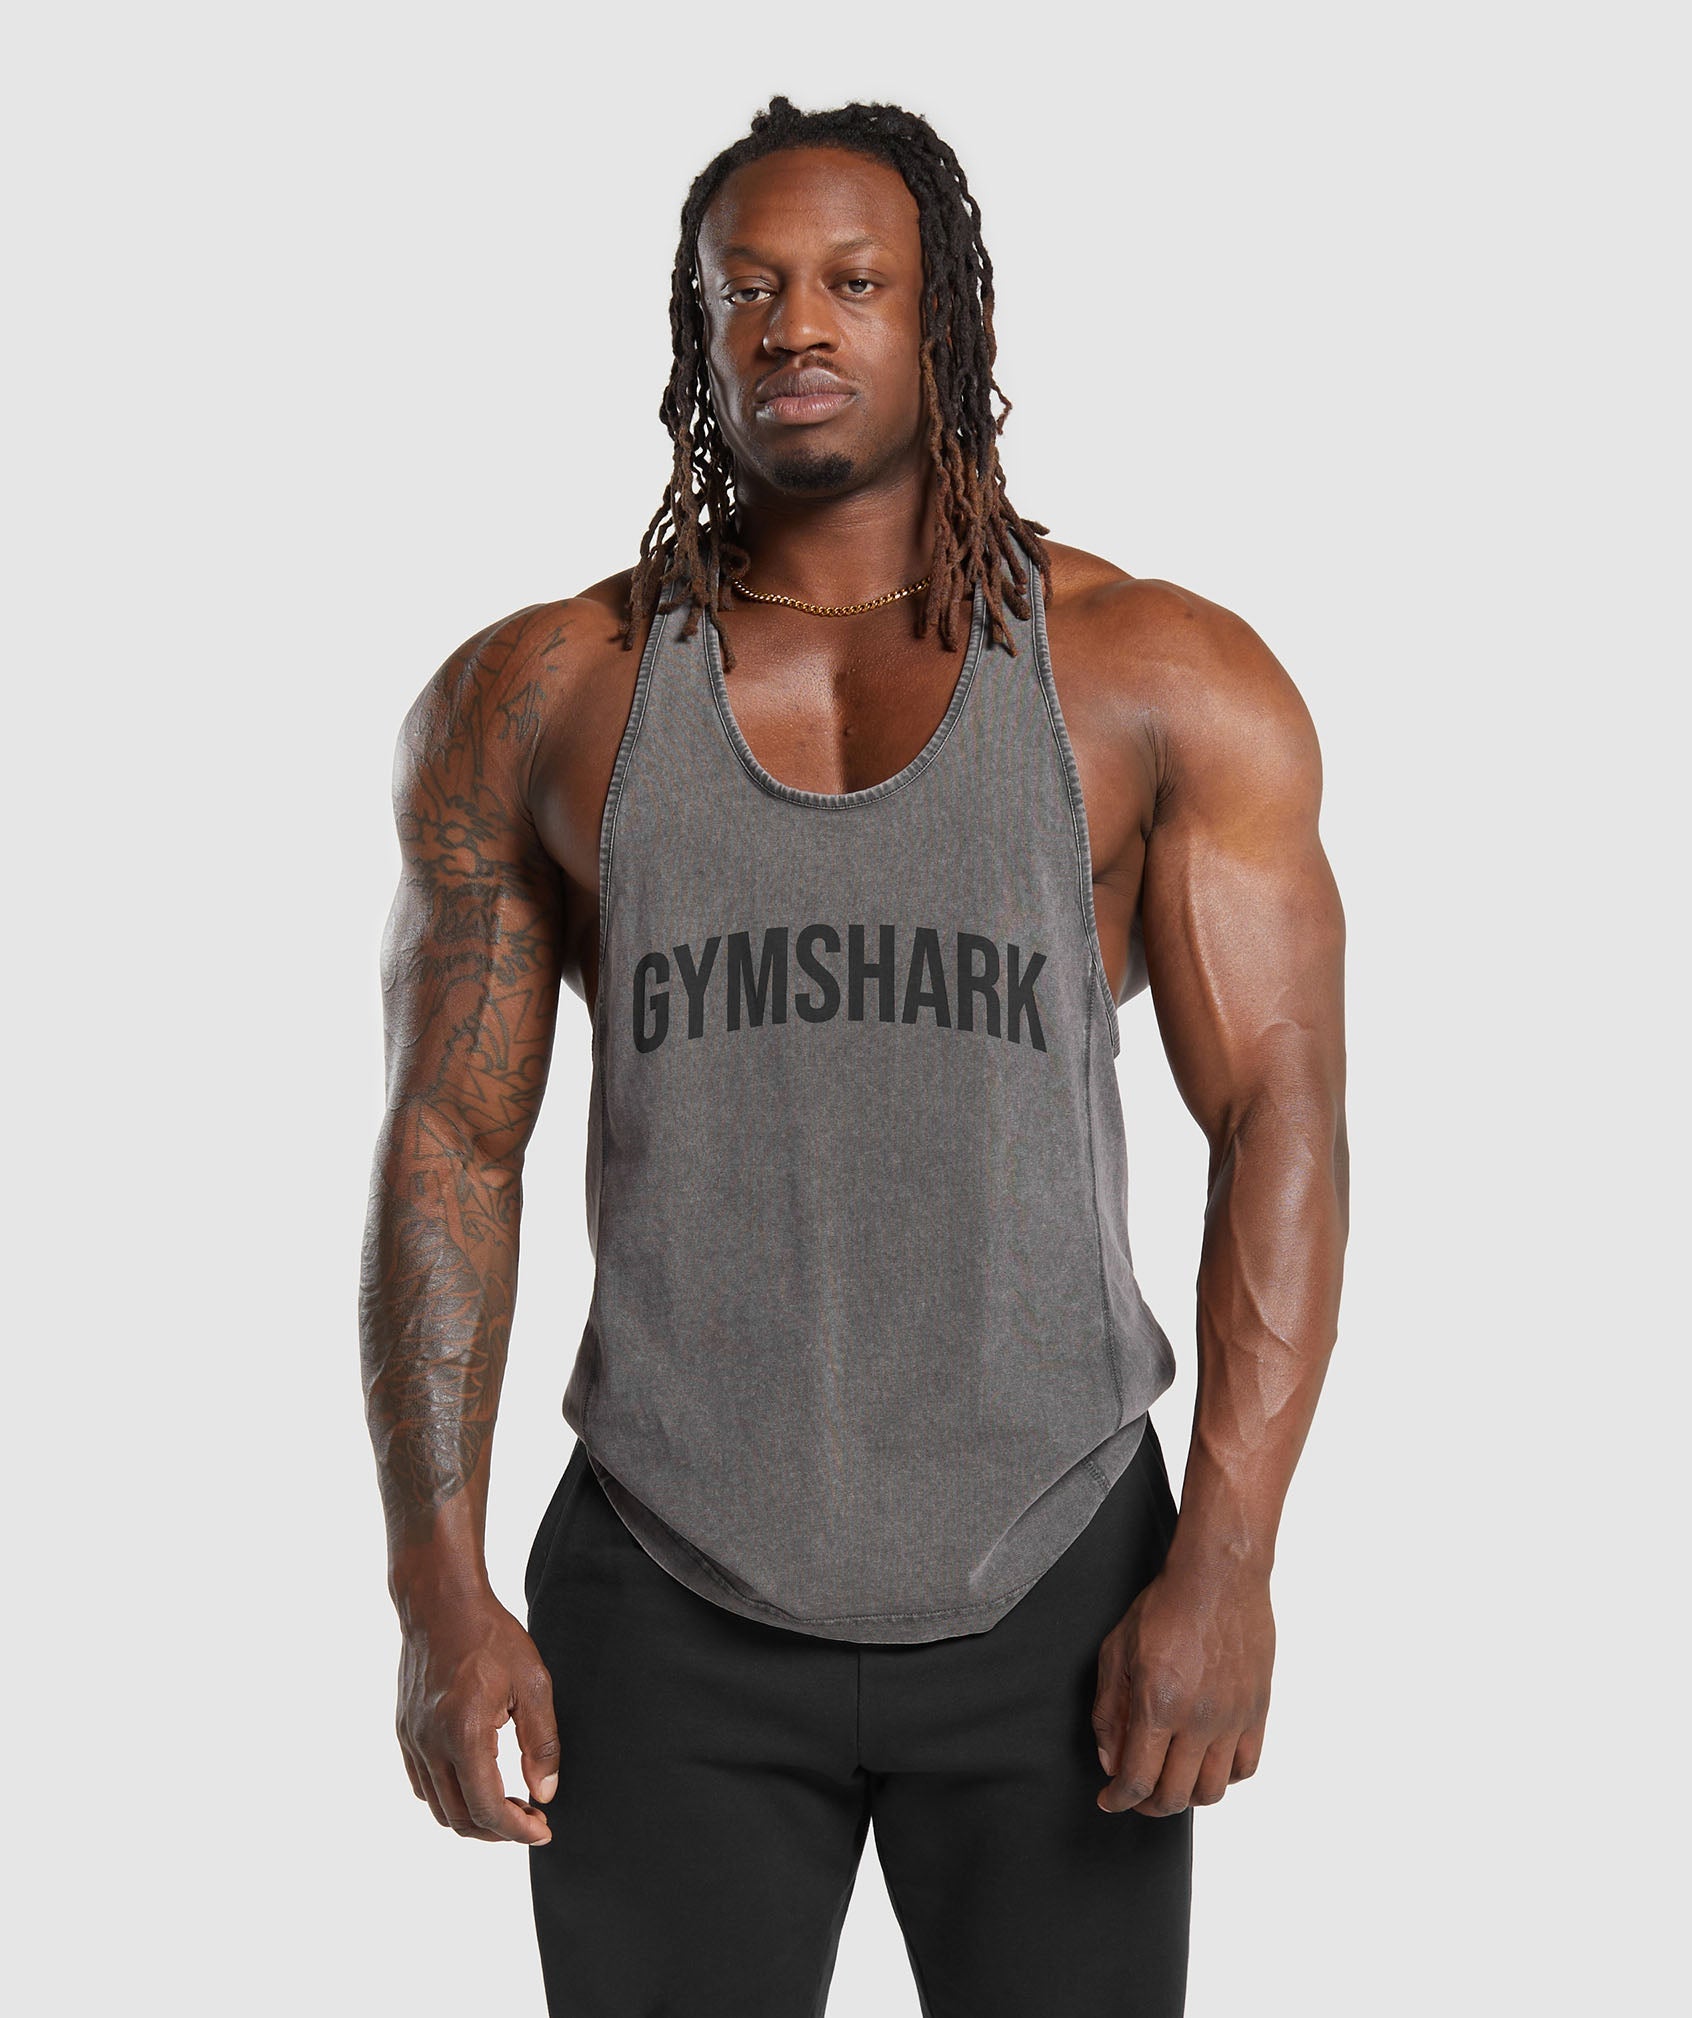 Gymshark on X: Out of this world. Order the impeccable Onyx